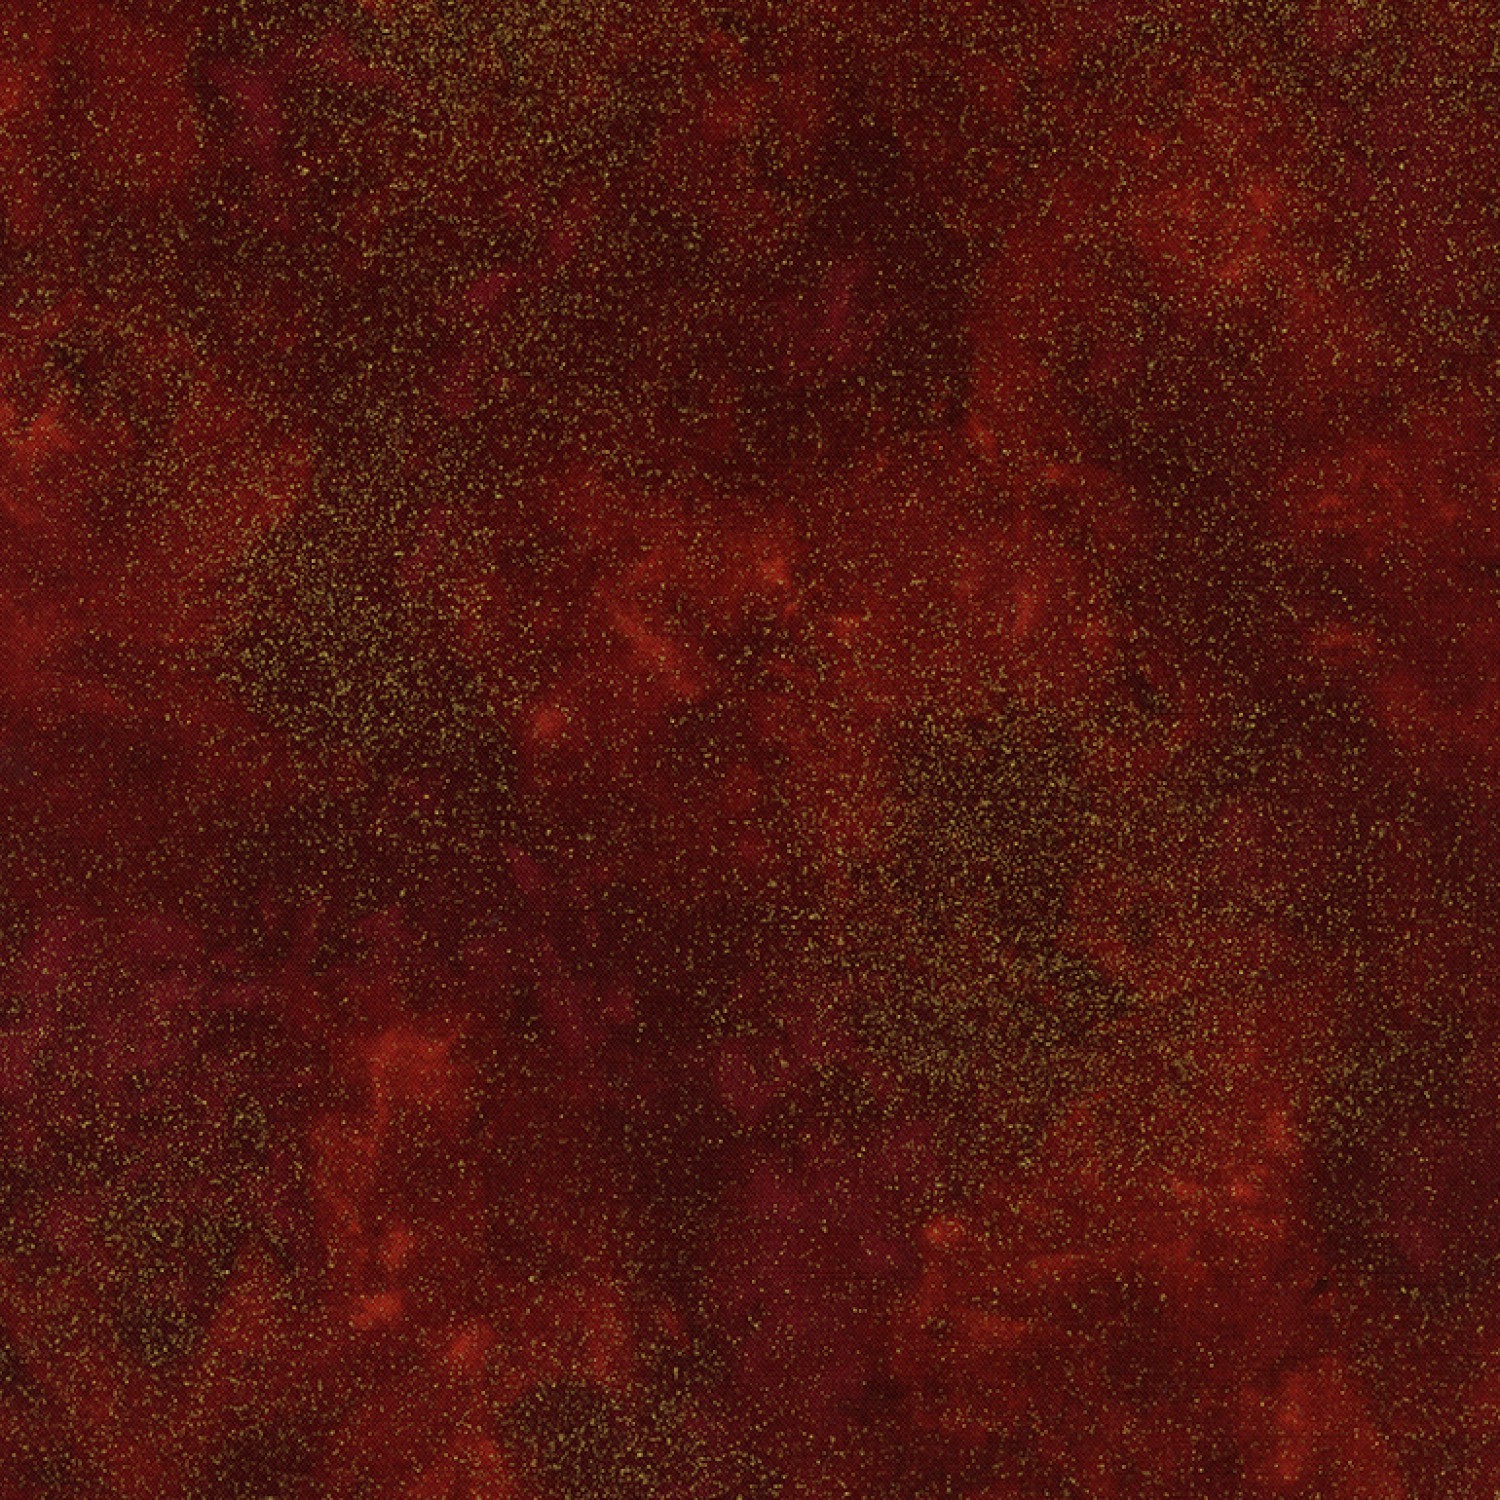 Timeless Treasures Shimmer Spice Metallic Fabric